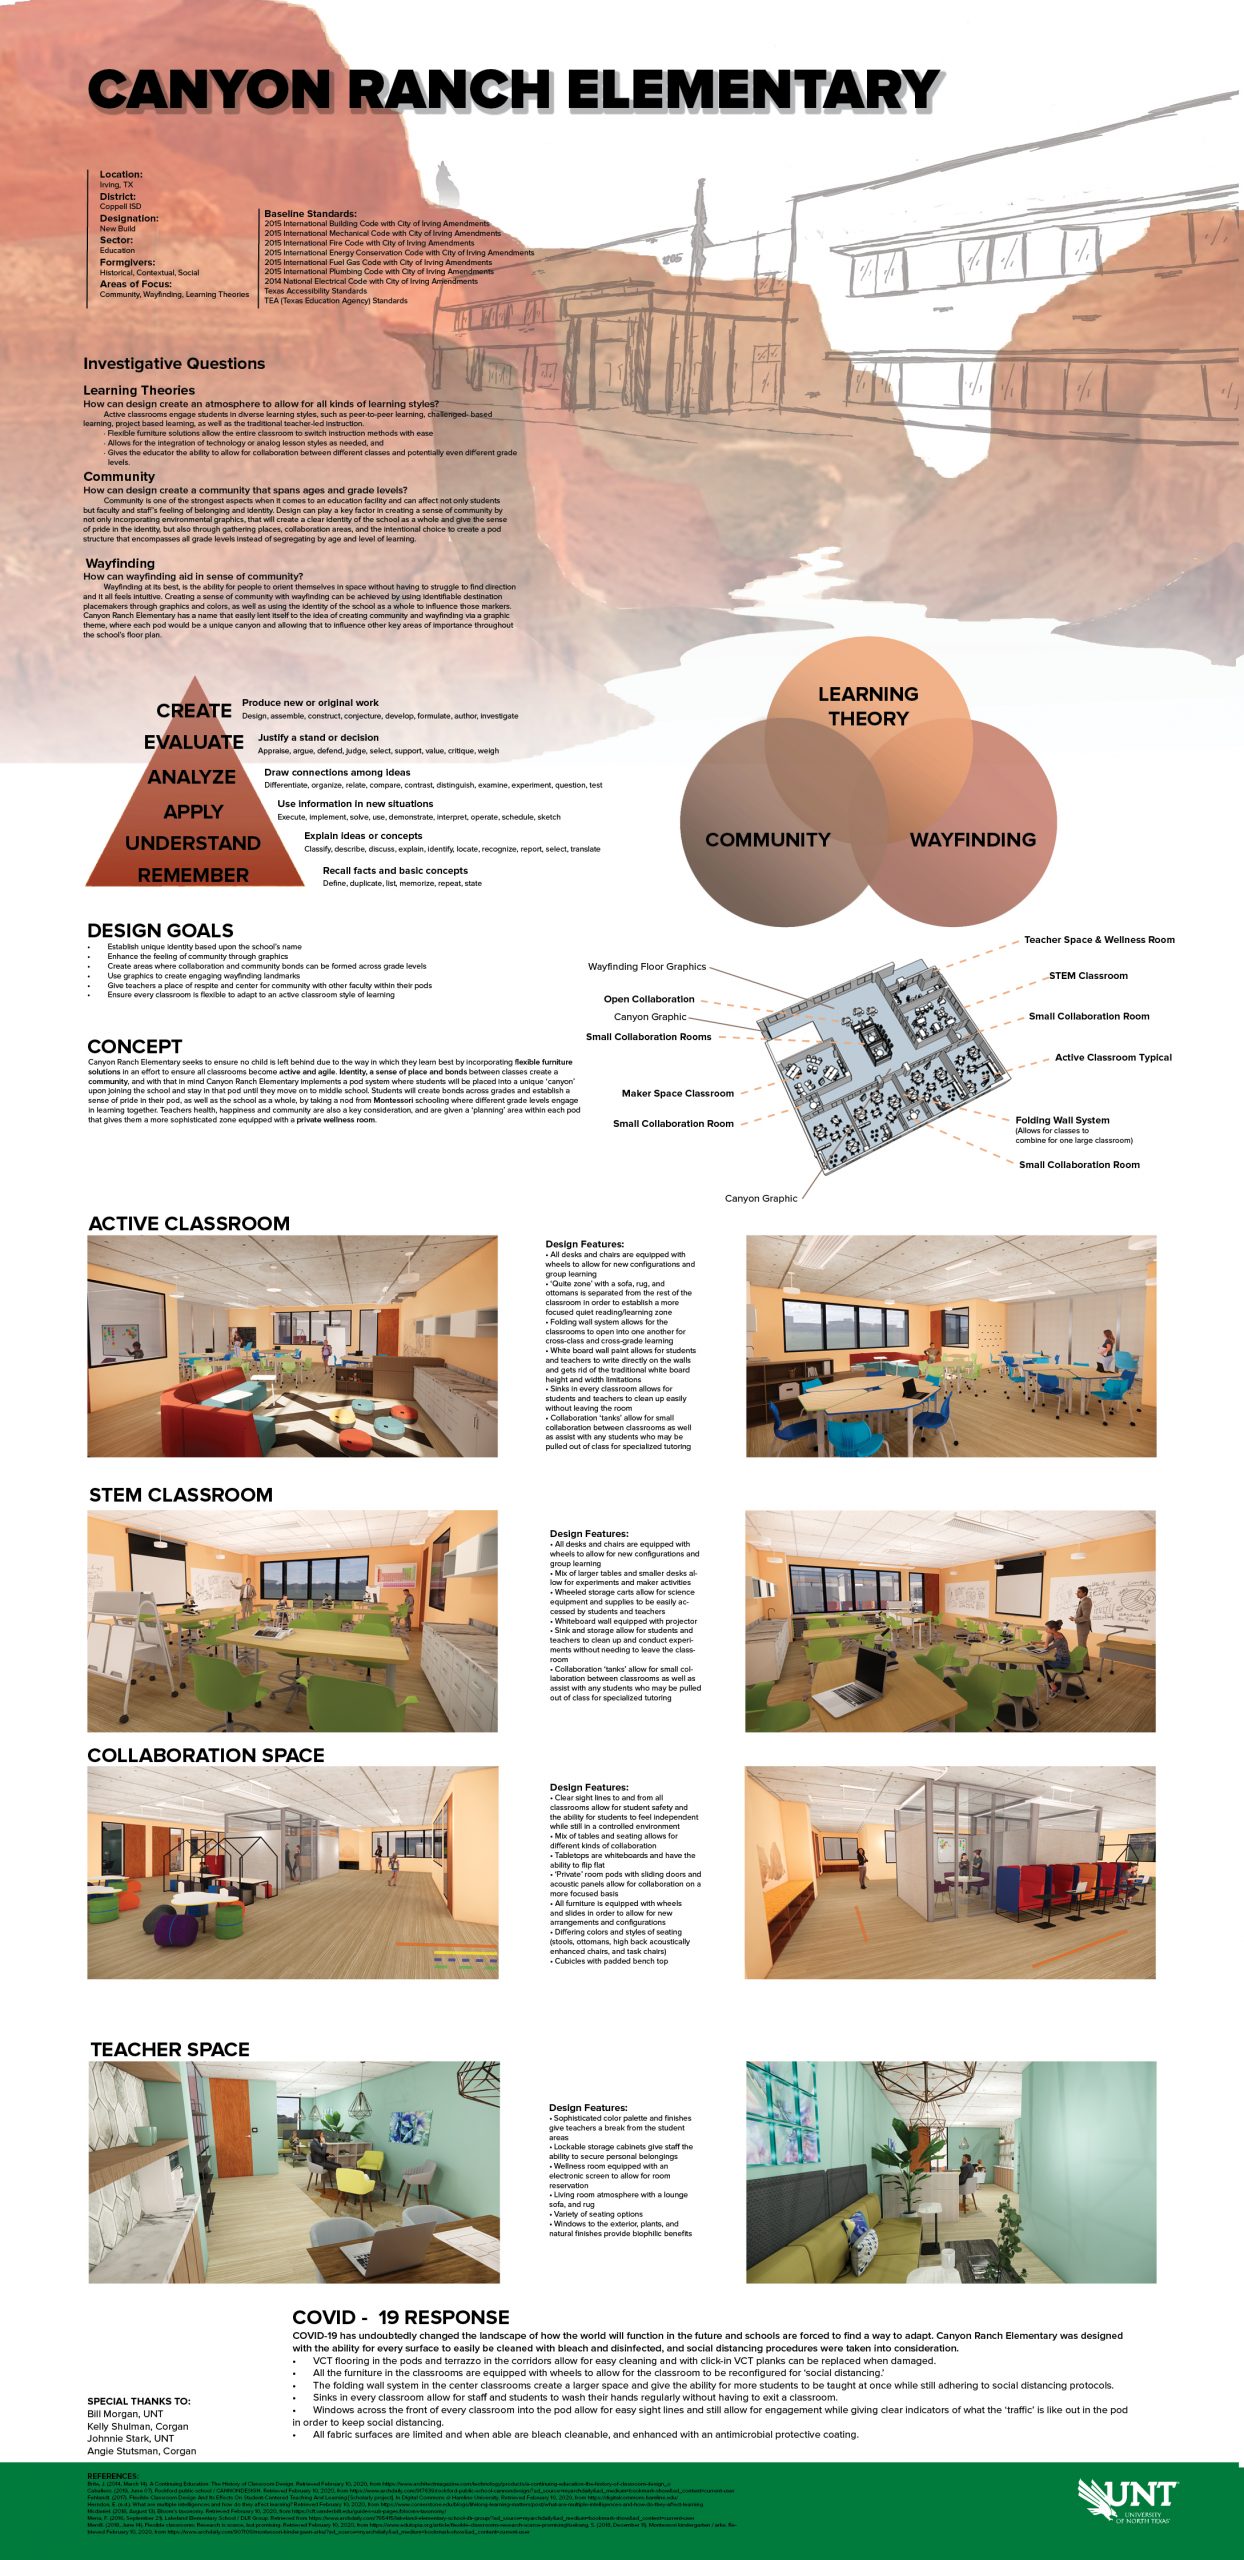 Canyon ranch elementary - Floor plan and class room designs